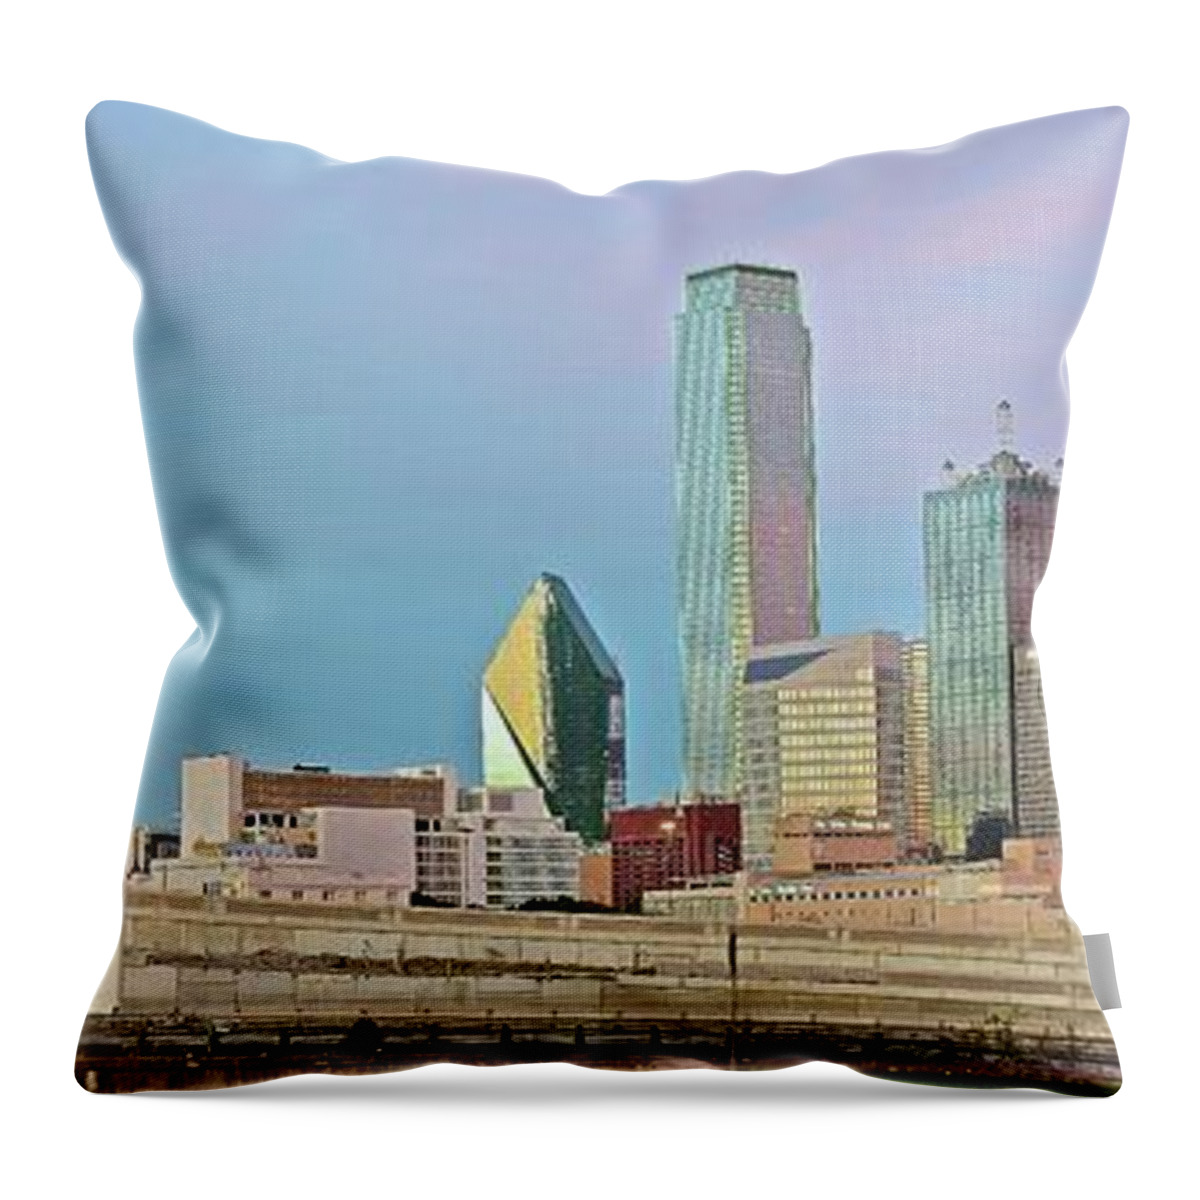 Dallas Throw Pillow featuring the photograph Fort Worths Big Brother by Frozen in Time Fine Art Photography